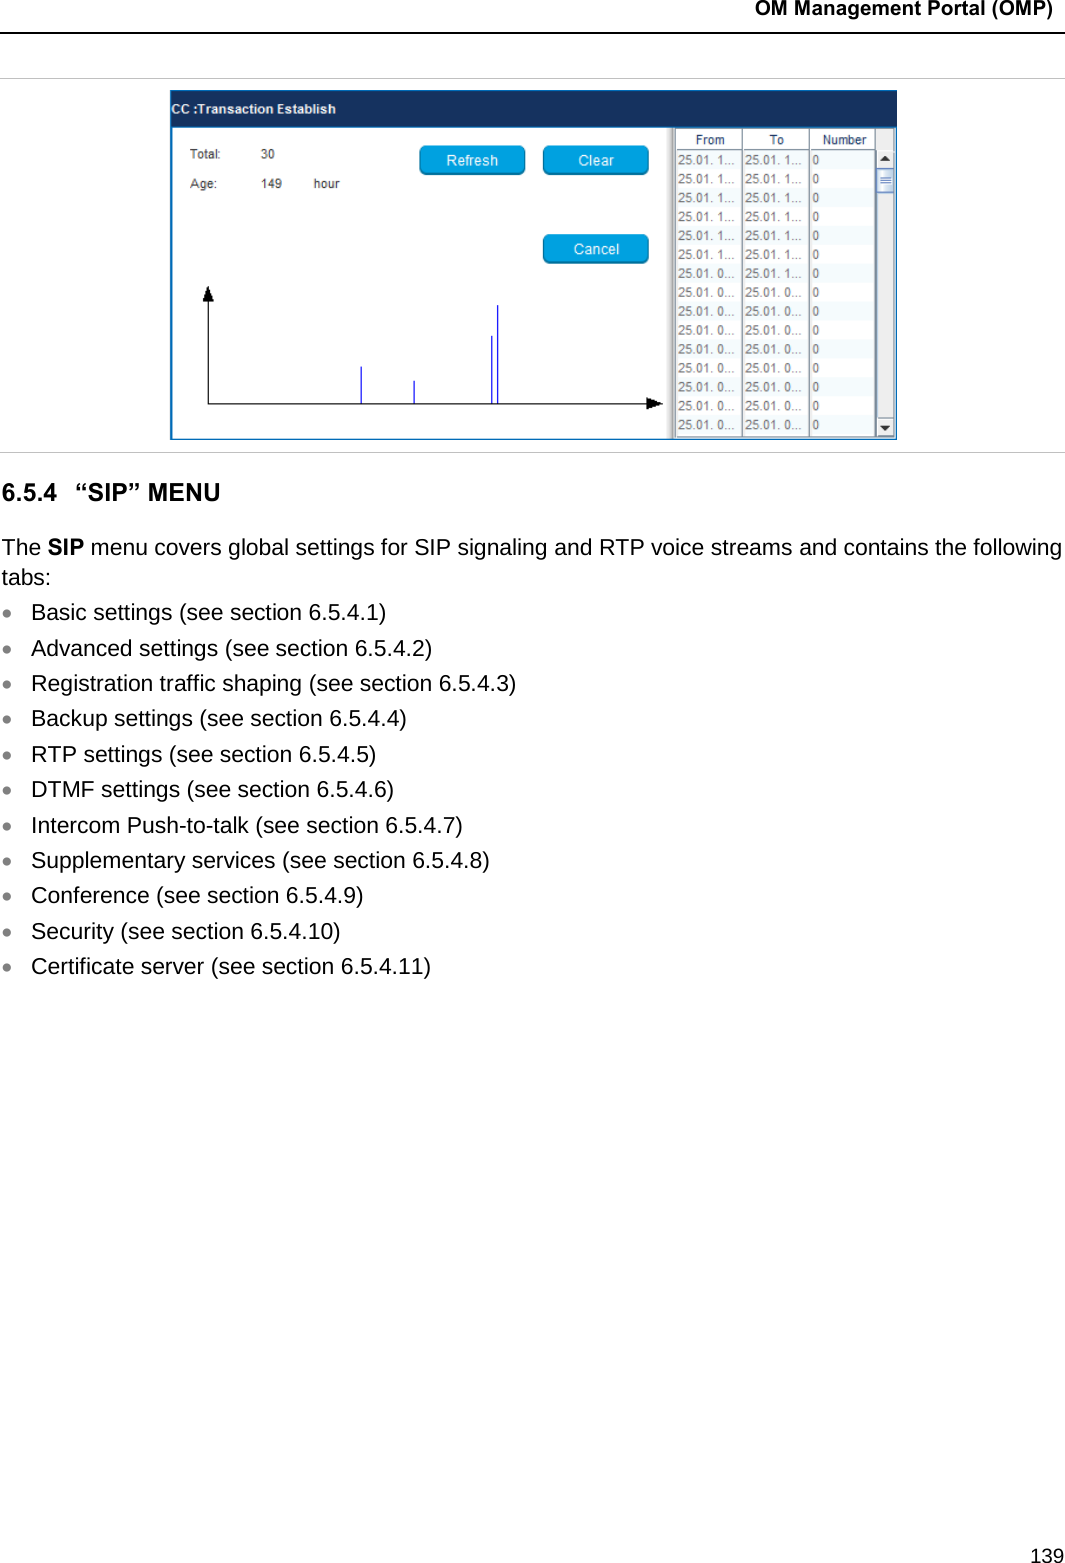  OM Management Portal (OMP)  139  6.5.4 “SIP” MENU The SIP menu covers global settings for SIP signaling and RTP voice streams and contains the following tabs: • Basic settings (see section 6.5.4.1) • Advanced settings (see section 6.5.4.2) • Registration traffic shaping (see section 6.5.4.3) • Backup settings (see section 6.5.4.4) • RTP settings (see section 6.5.4.5) • DTMF settings (see section 6.5.4.6) • Intercom Push-to-talk (see section 6.5.4.7) • Supplementary services (see section 6.5.4.8) • Conference (see section 6.5.4.9) • Security (see section 6.5.4.10) • Certificate server (see section 6.5.4.11)             